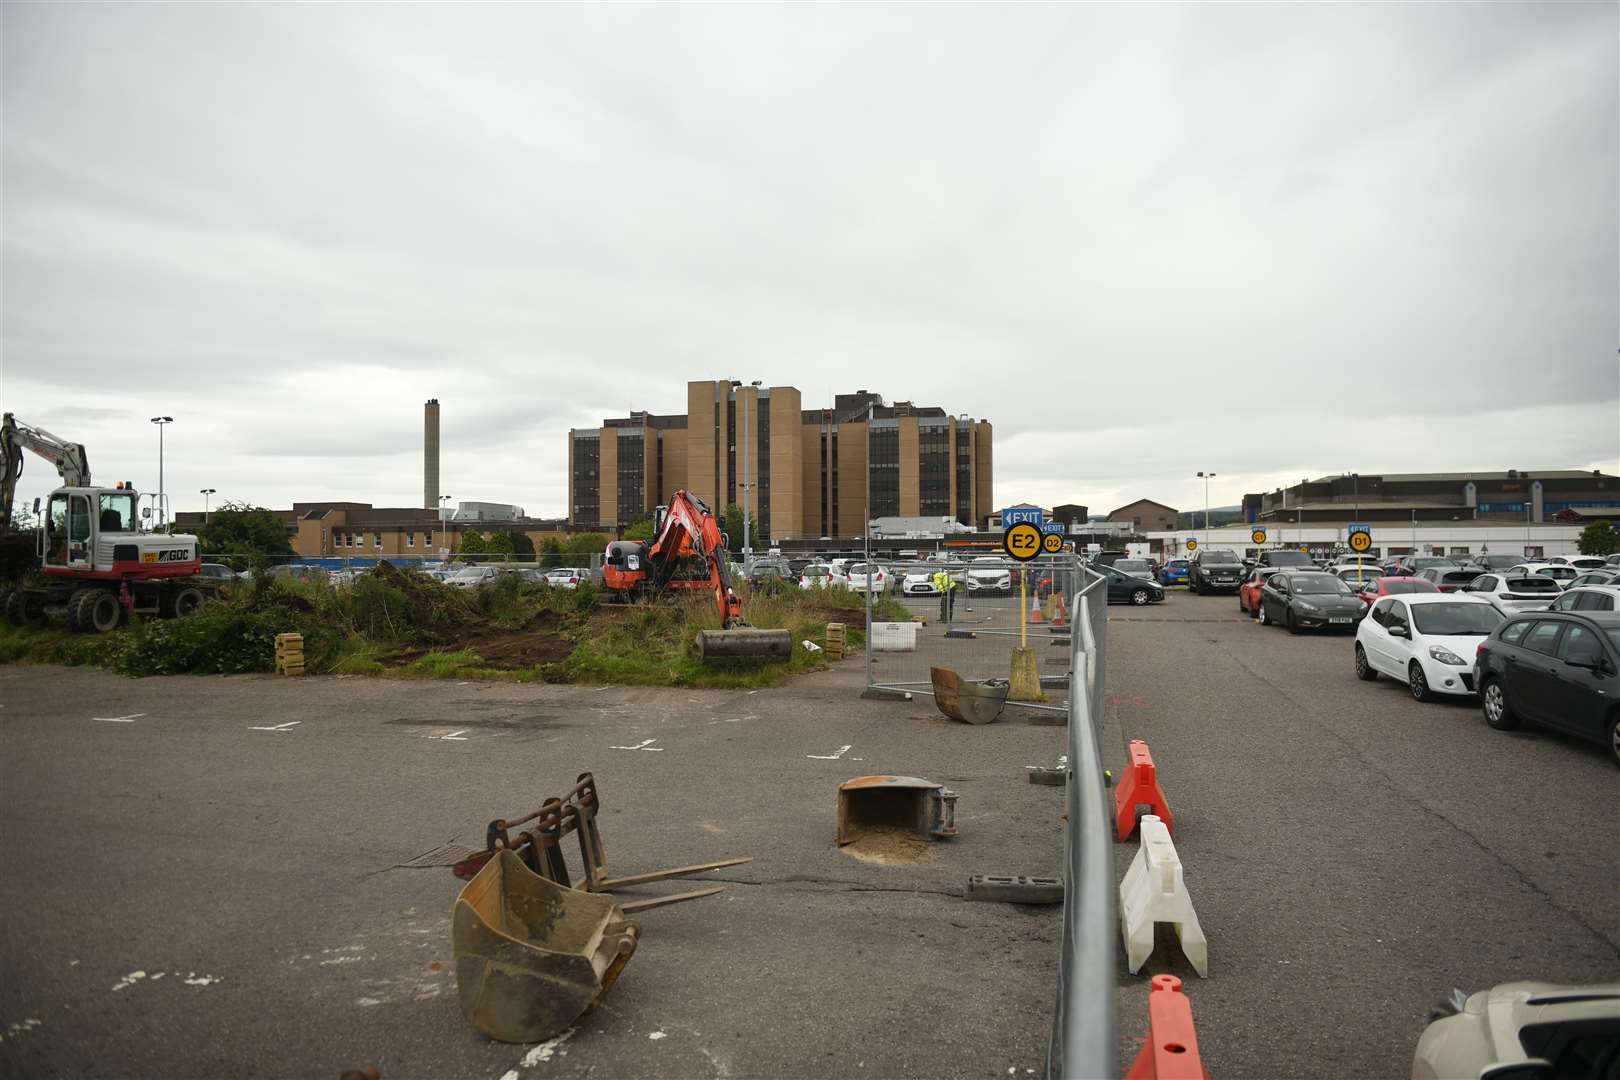 The work at the Raigmore Hospital car park will include resurfacing, new lighting and CCTV upgrade.